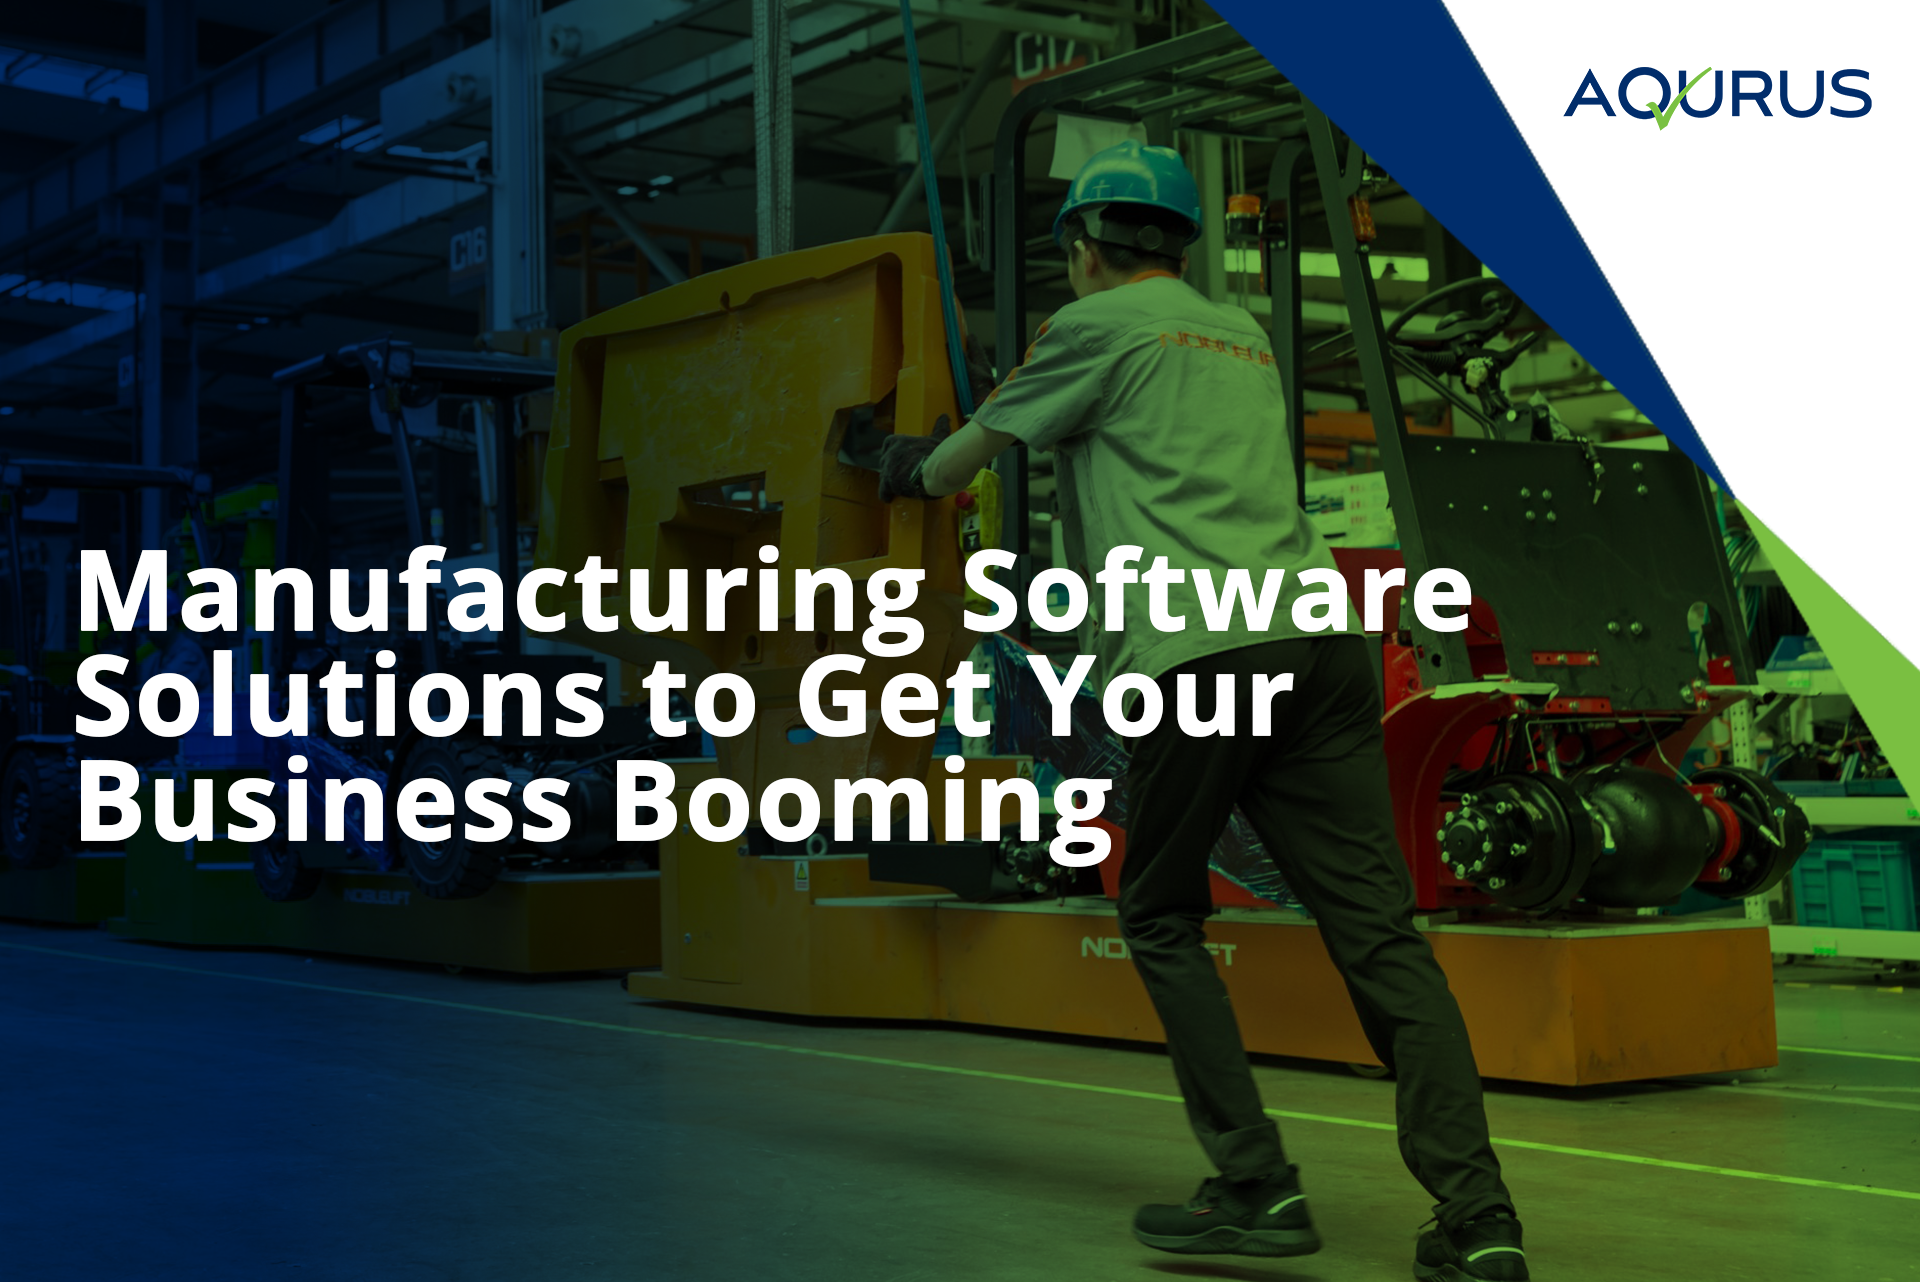 Blog-Manufacturing-Software-Solution-to-Get-Your-Business-Booming